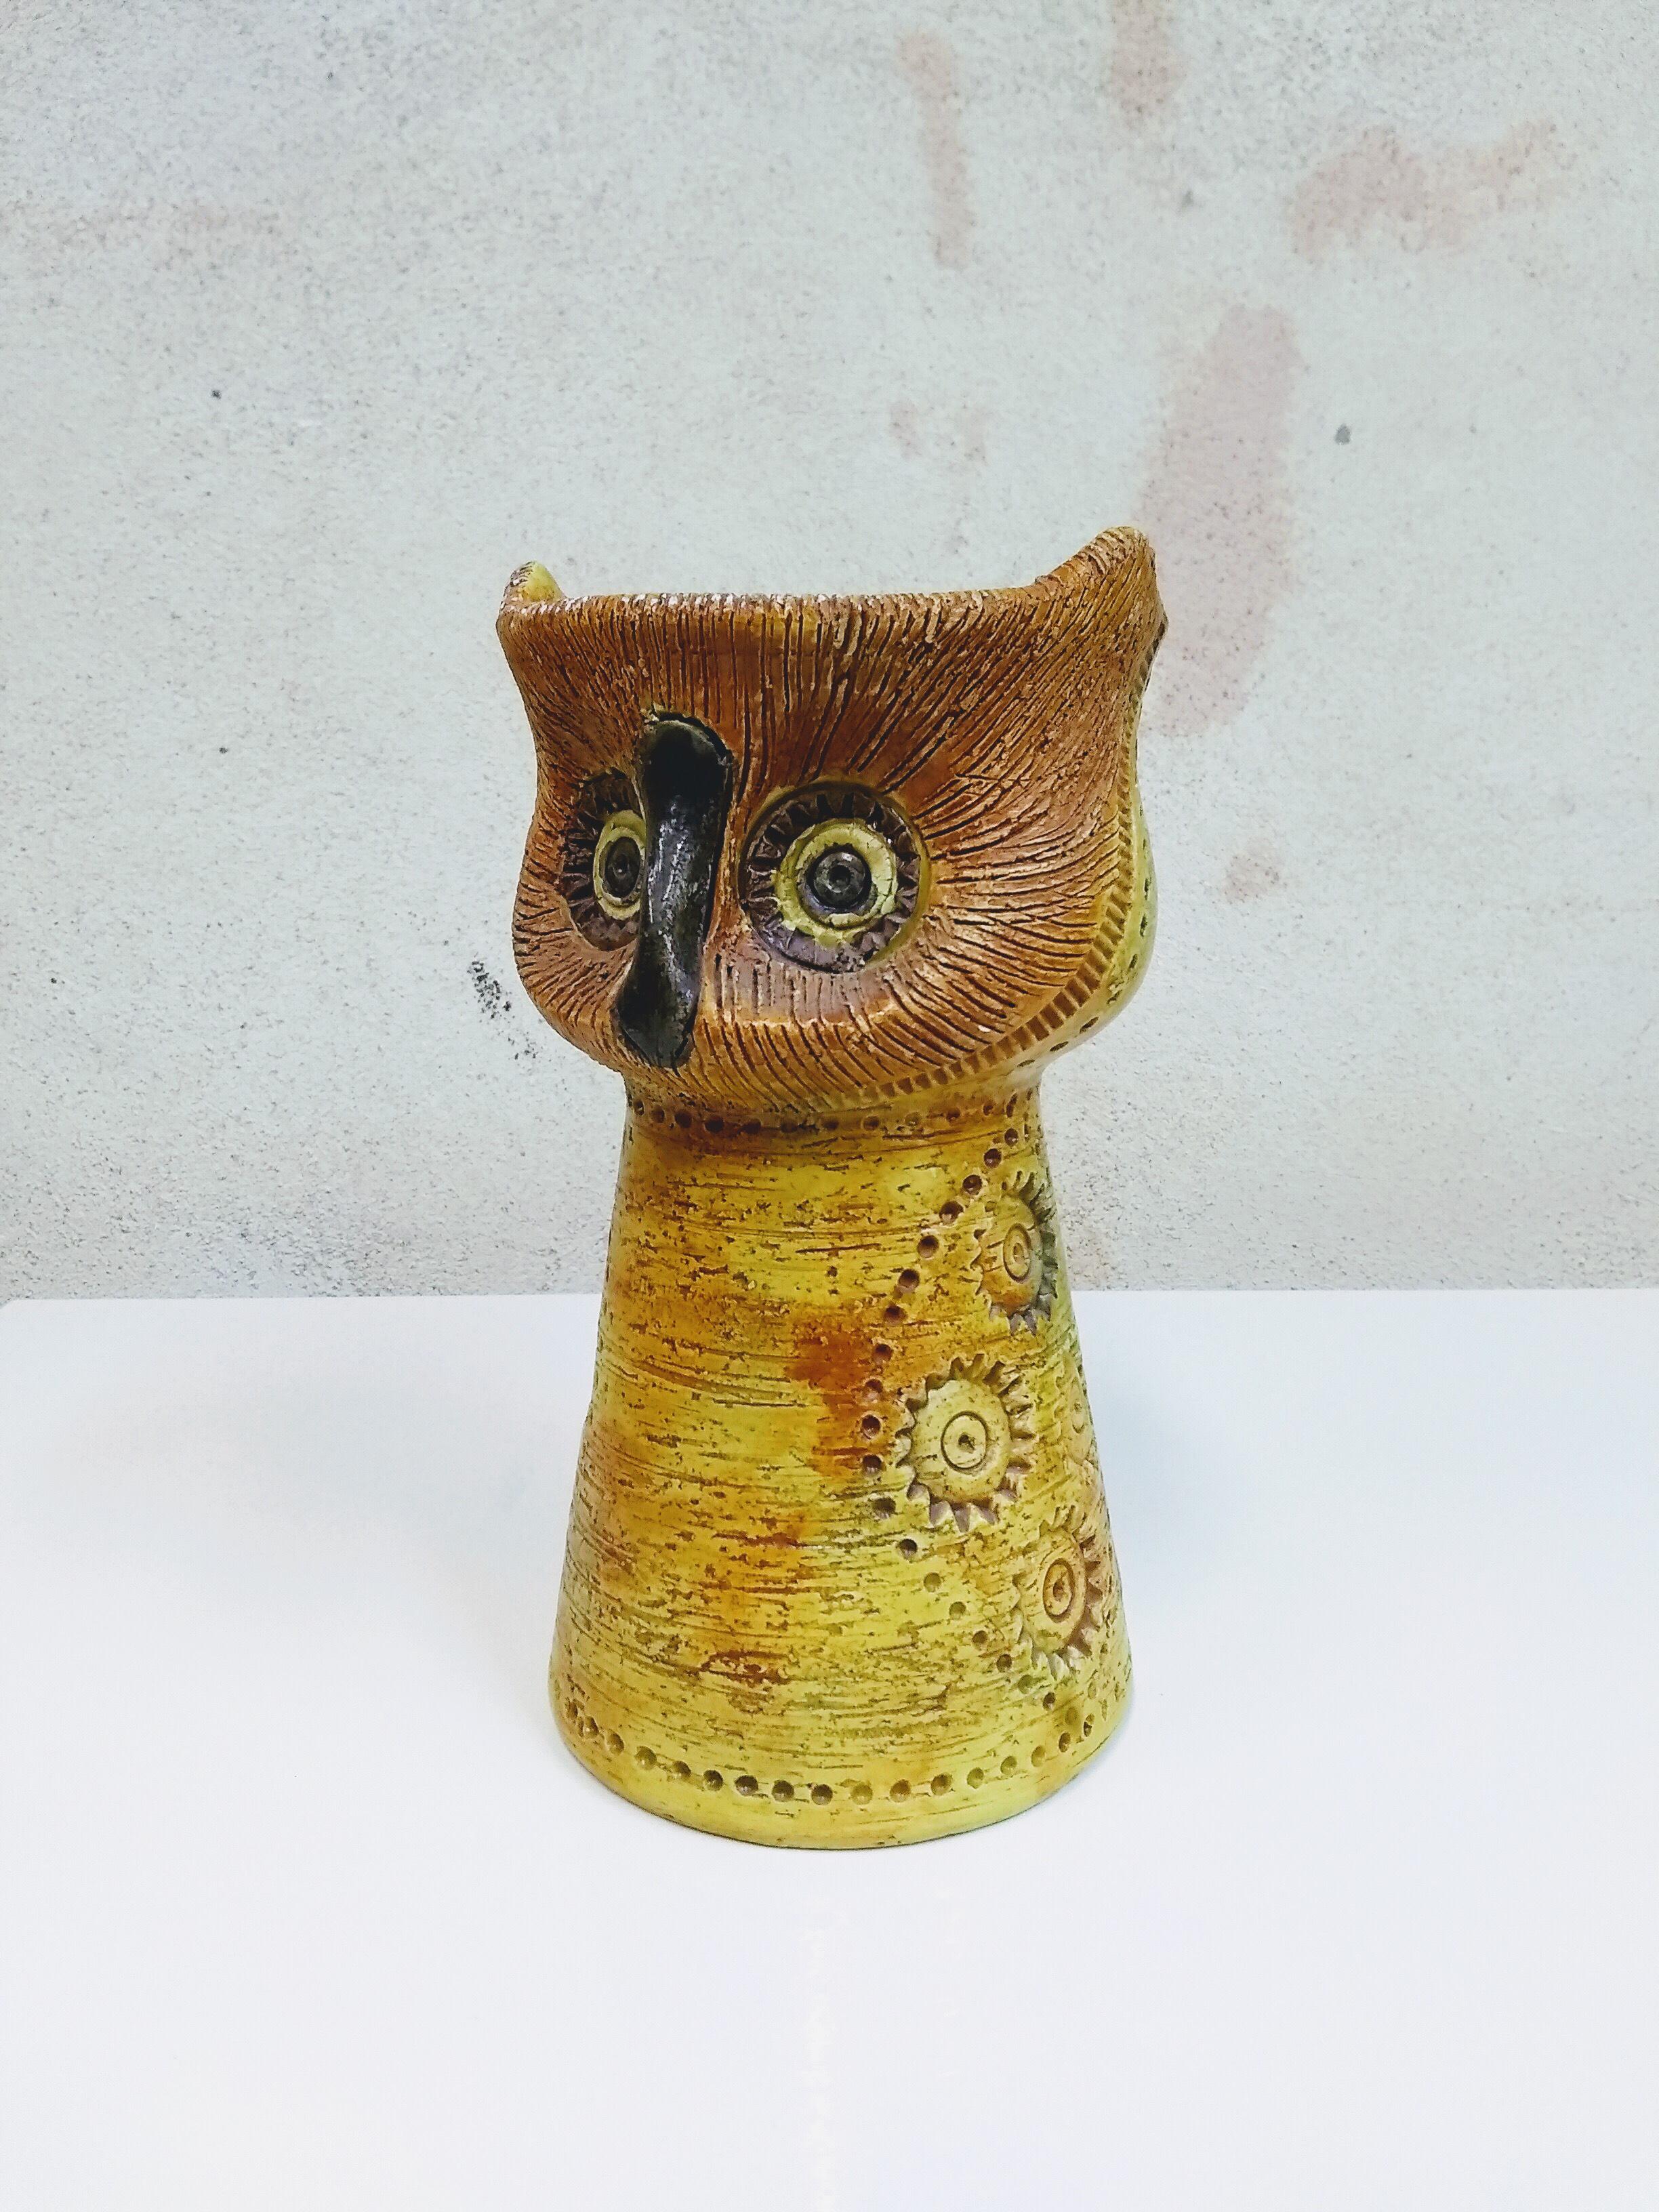 Mid-20th Century Aldo Londi Italian Ceramic Owl for Bitossi imported by Rosenthal and Netter